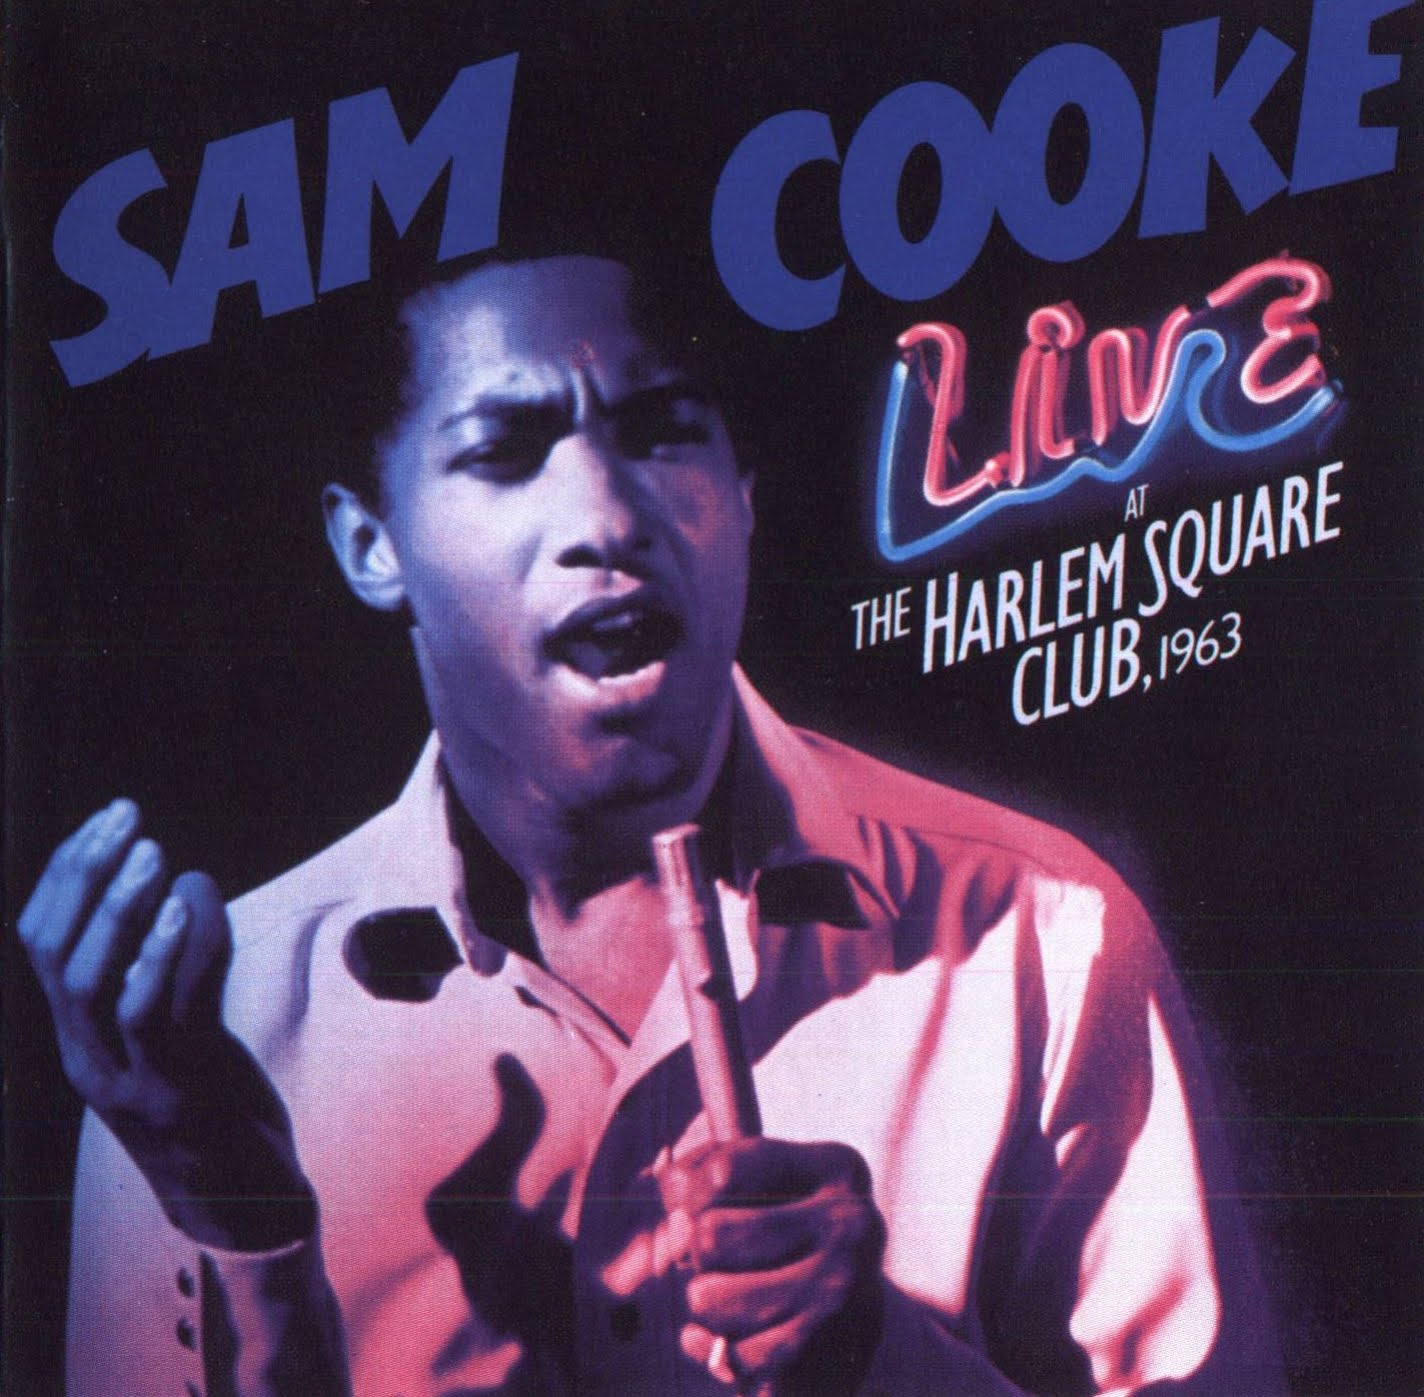 The album cover for Sam Cooke's One Night Stand